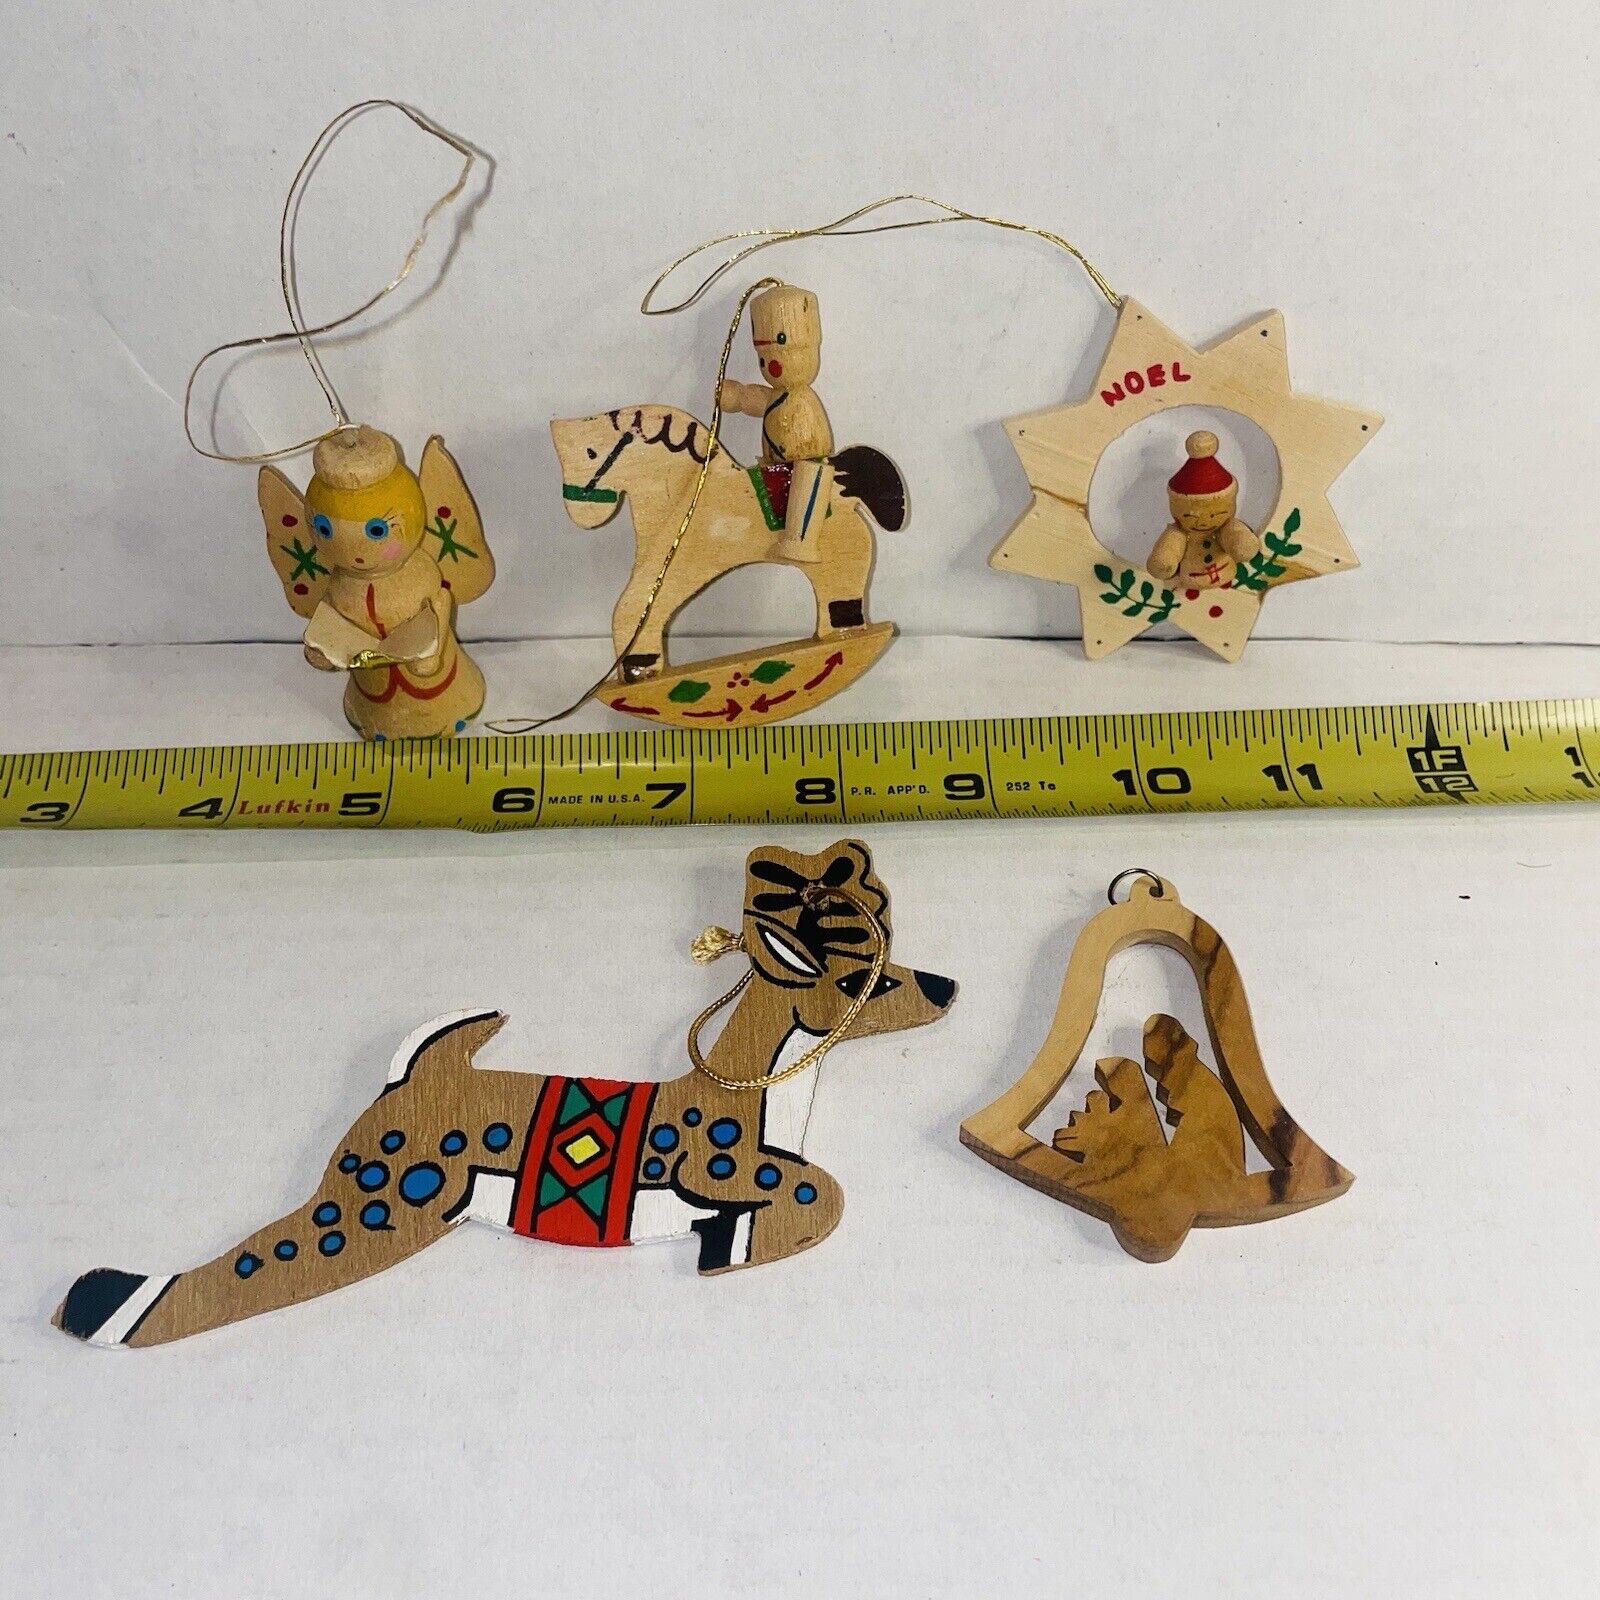 Vintage Lot of 5 Classic Mini Wooden Christmas Ornaments Hand Painted Holiday